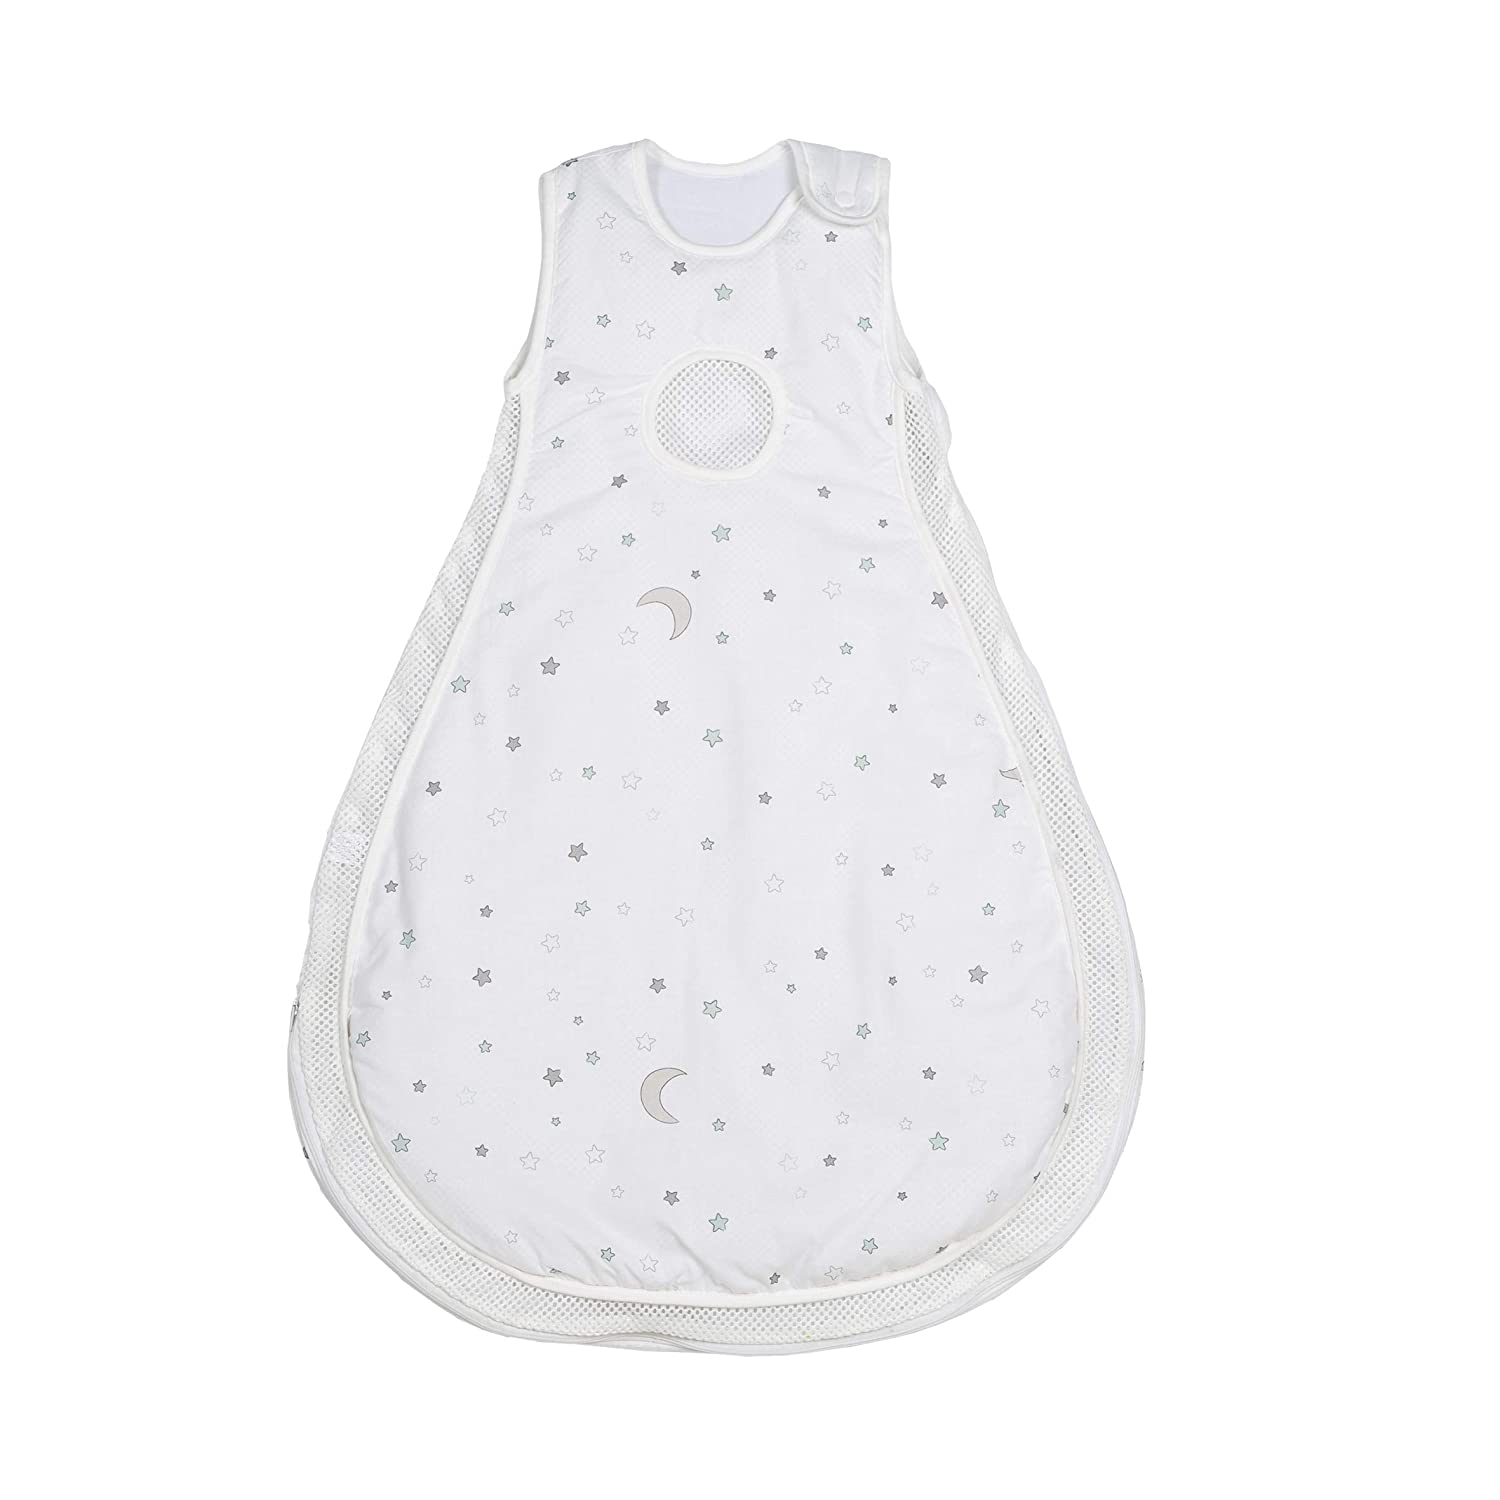 Roba safe asleep Easy Air Baby Sleeping Bag \"Star Magic\" Size 62/68 cm, 100% Cotton, Woven, Printed, Soft Filling 100% Polyester, Mesh Inserts, Air Balance System